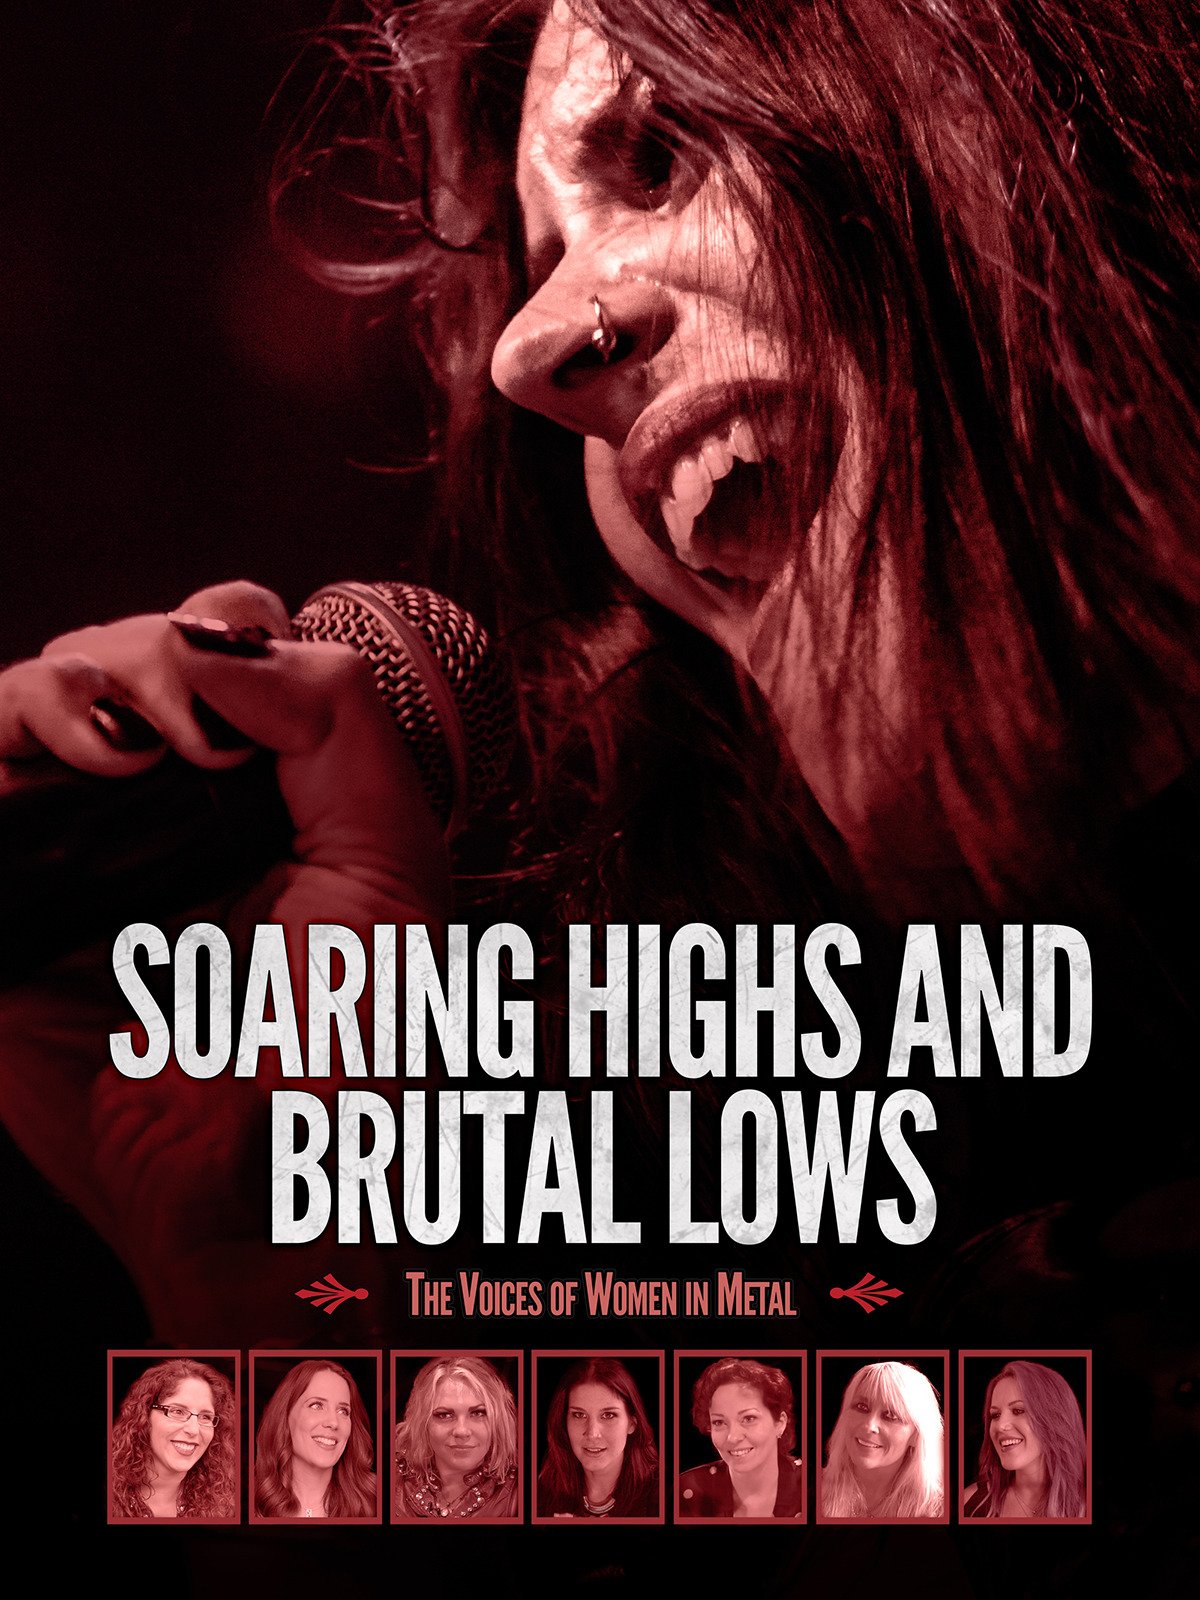 Soaring Highs And Brutal Lows GG NLSUBBED 1080p WEB x264-DDF